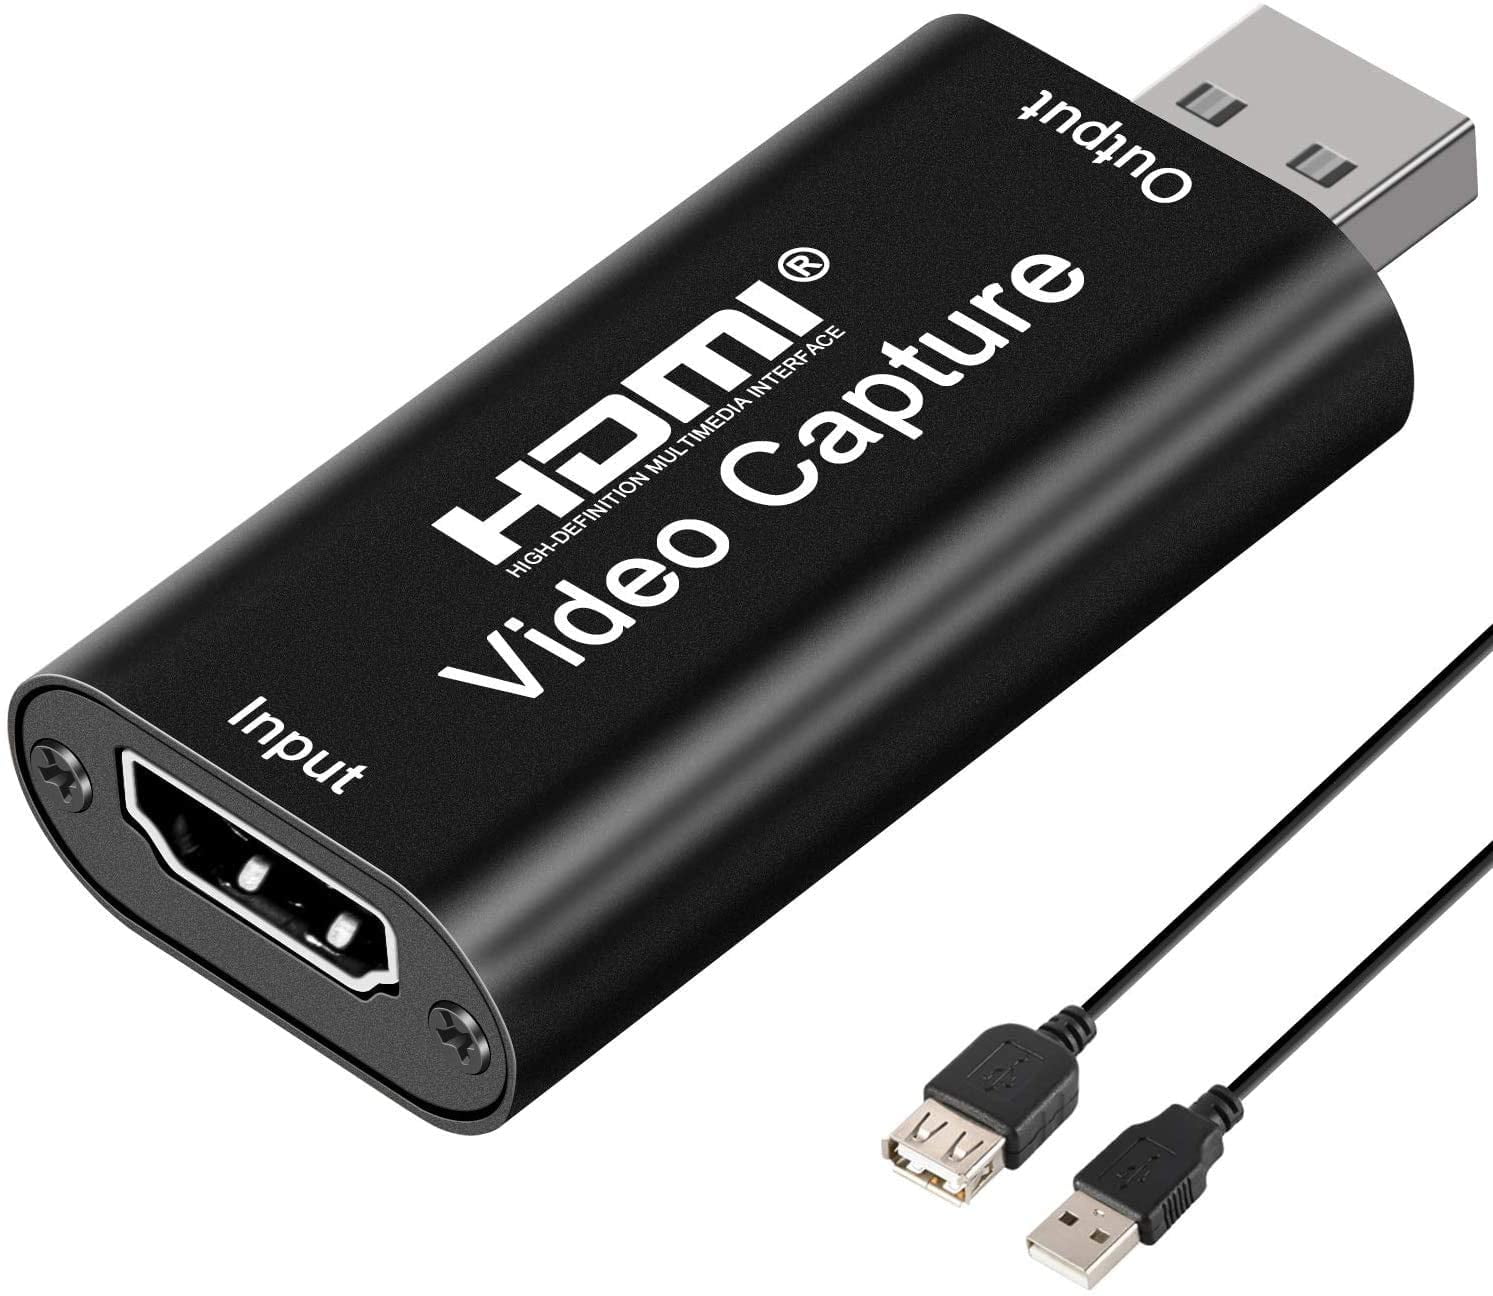 Barka Ave Hdmi Audio Video Capture Card Hd 1080p 60 Fps Recording Via Dslr Camcorder Action Cam Ps4 Xbox One 360 Wii U And Nintendo Switch Walmart Com